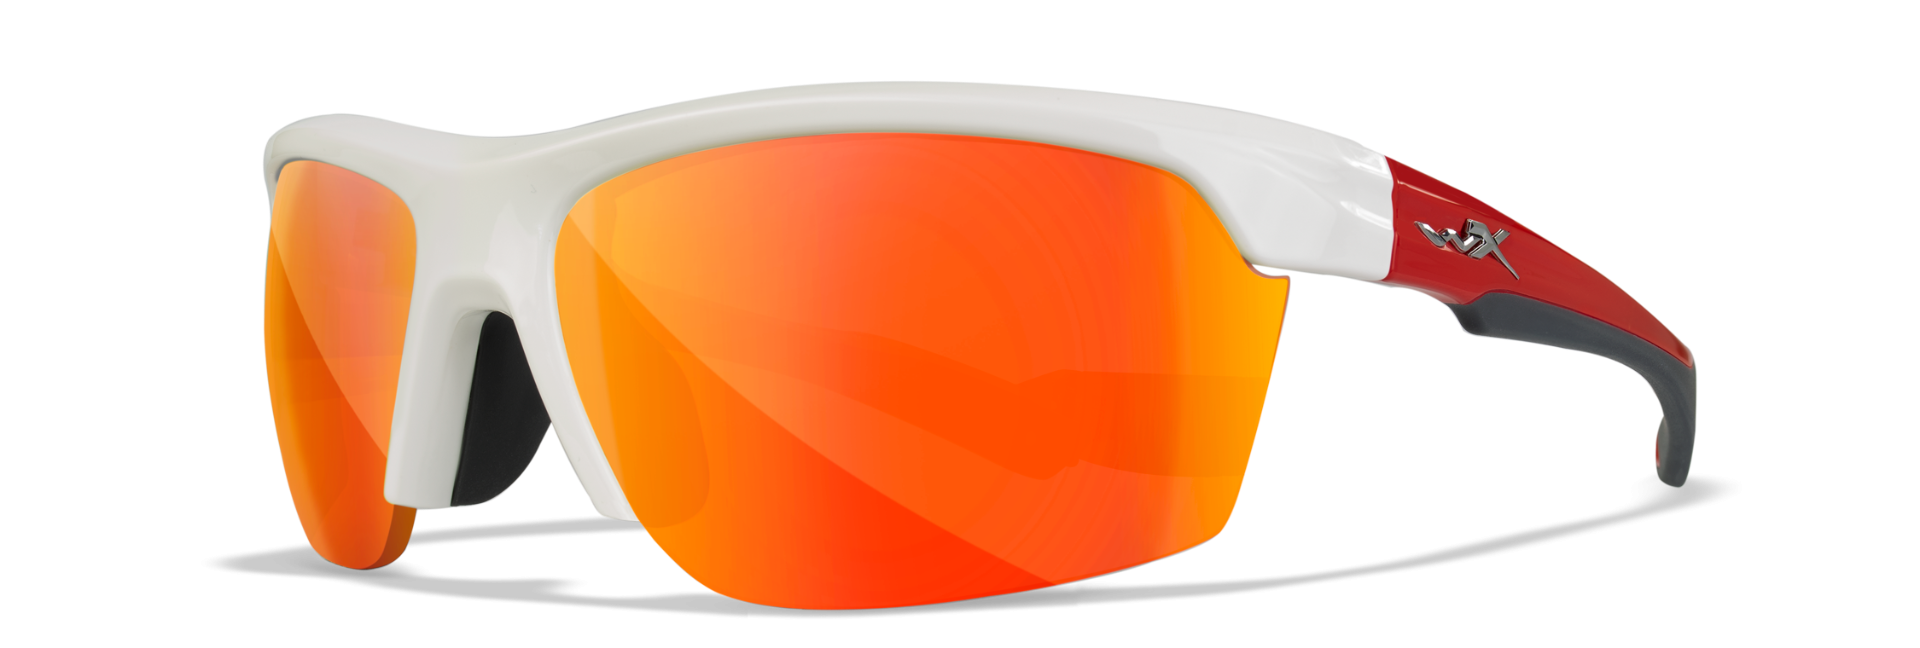 Wiley-X WX Swift ASTM Rated Sports Glasses